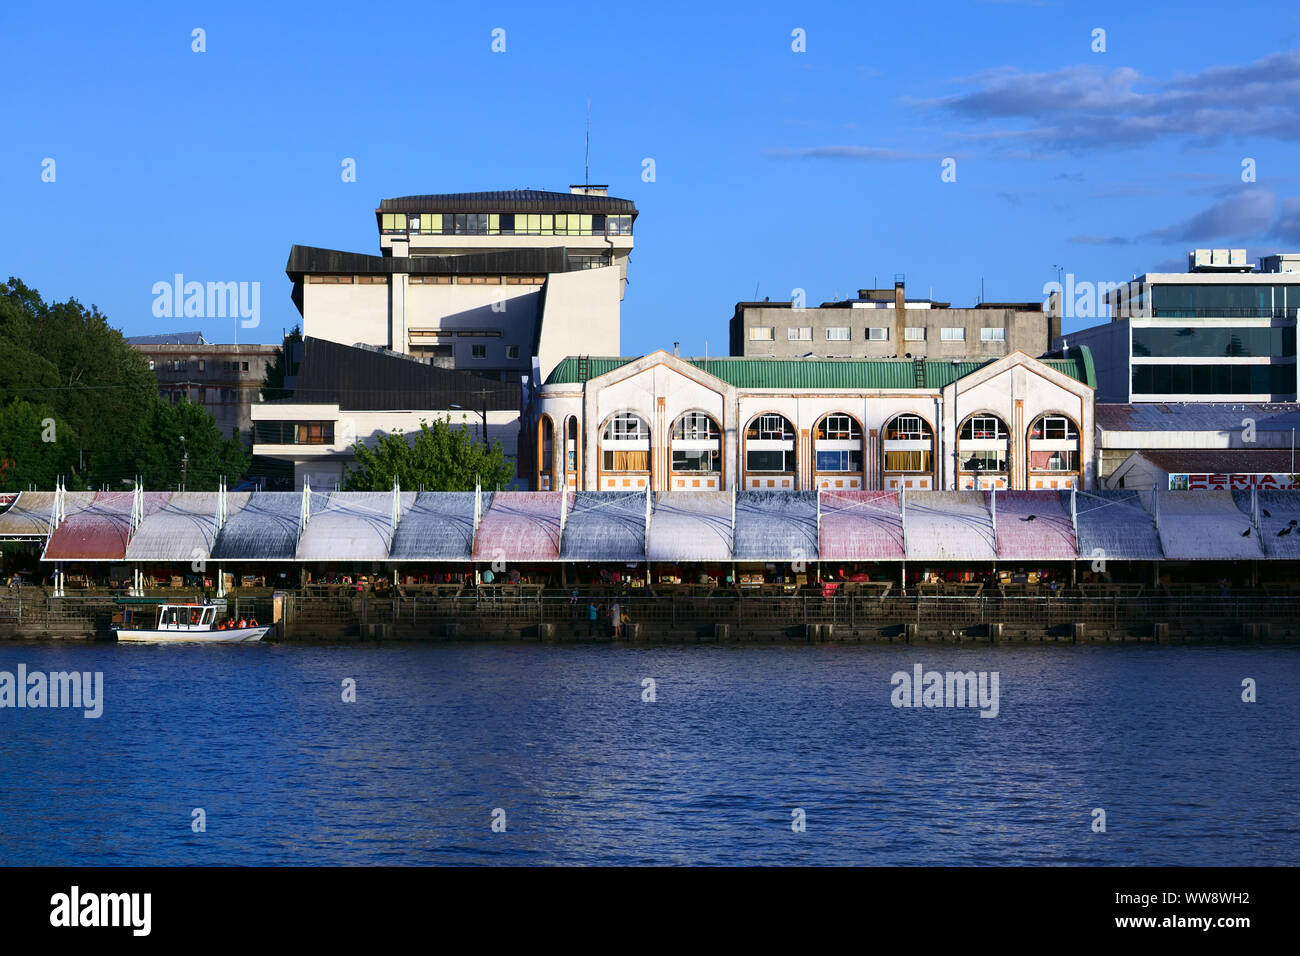 VALDIVIA, CHILE - FEBRUARY 3, 2016: Feria Fluvial (riverside market selling fish, fruit, vegetable) and behind it the Municipal Market in Valdivia Stock Photo